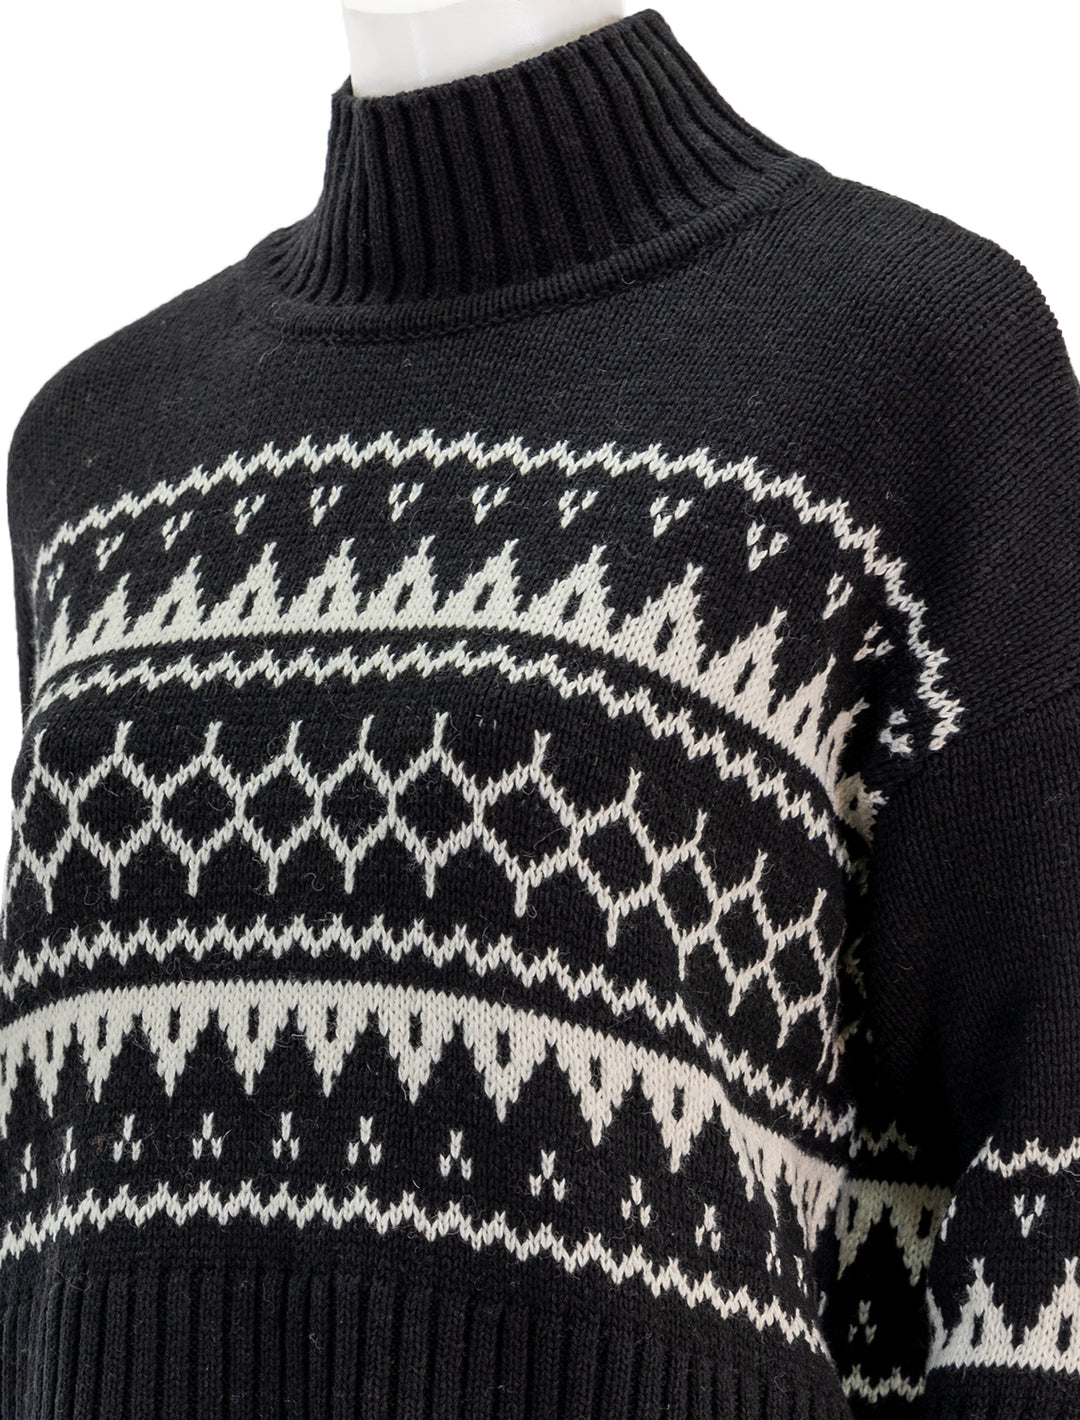 Close-up view of Barbour's pine knit turtleneck in black.